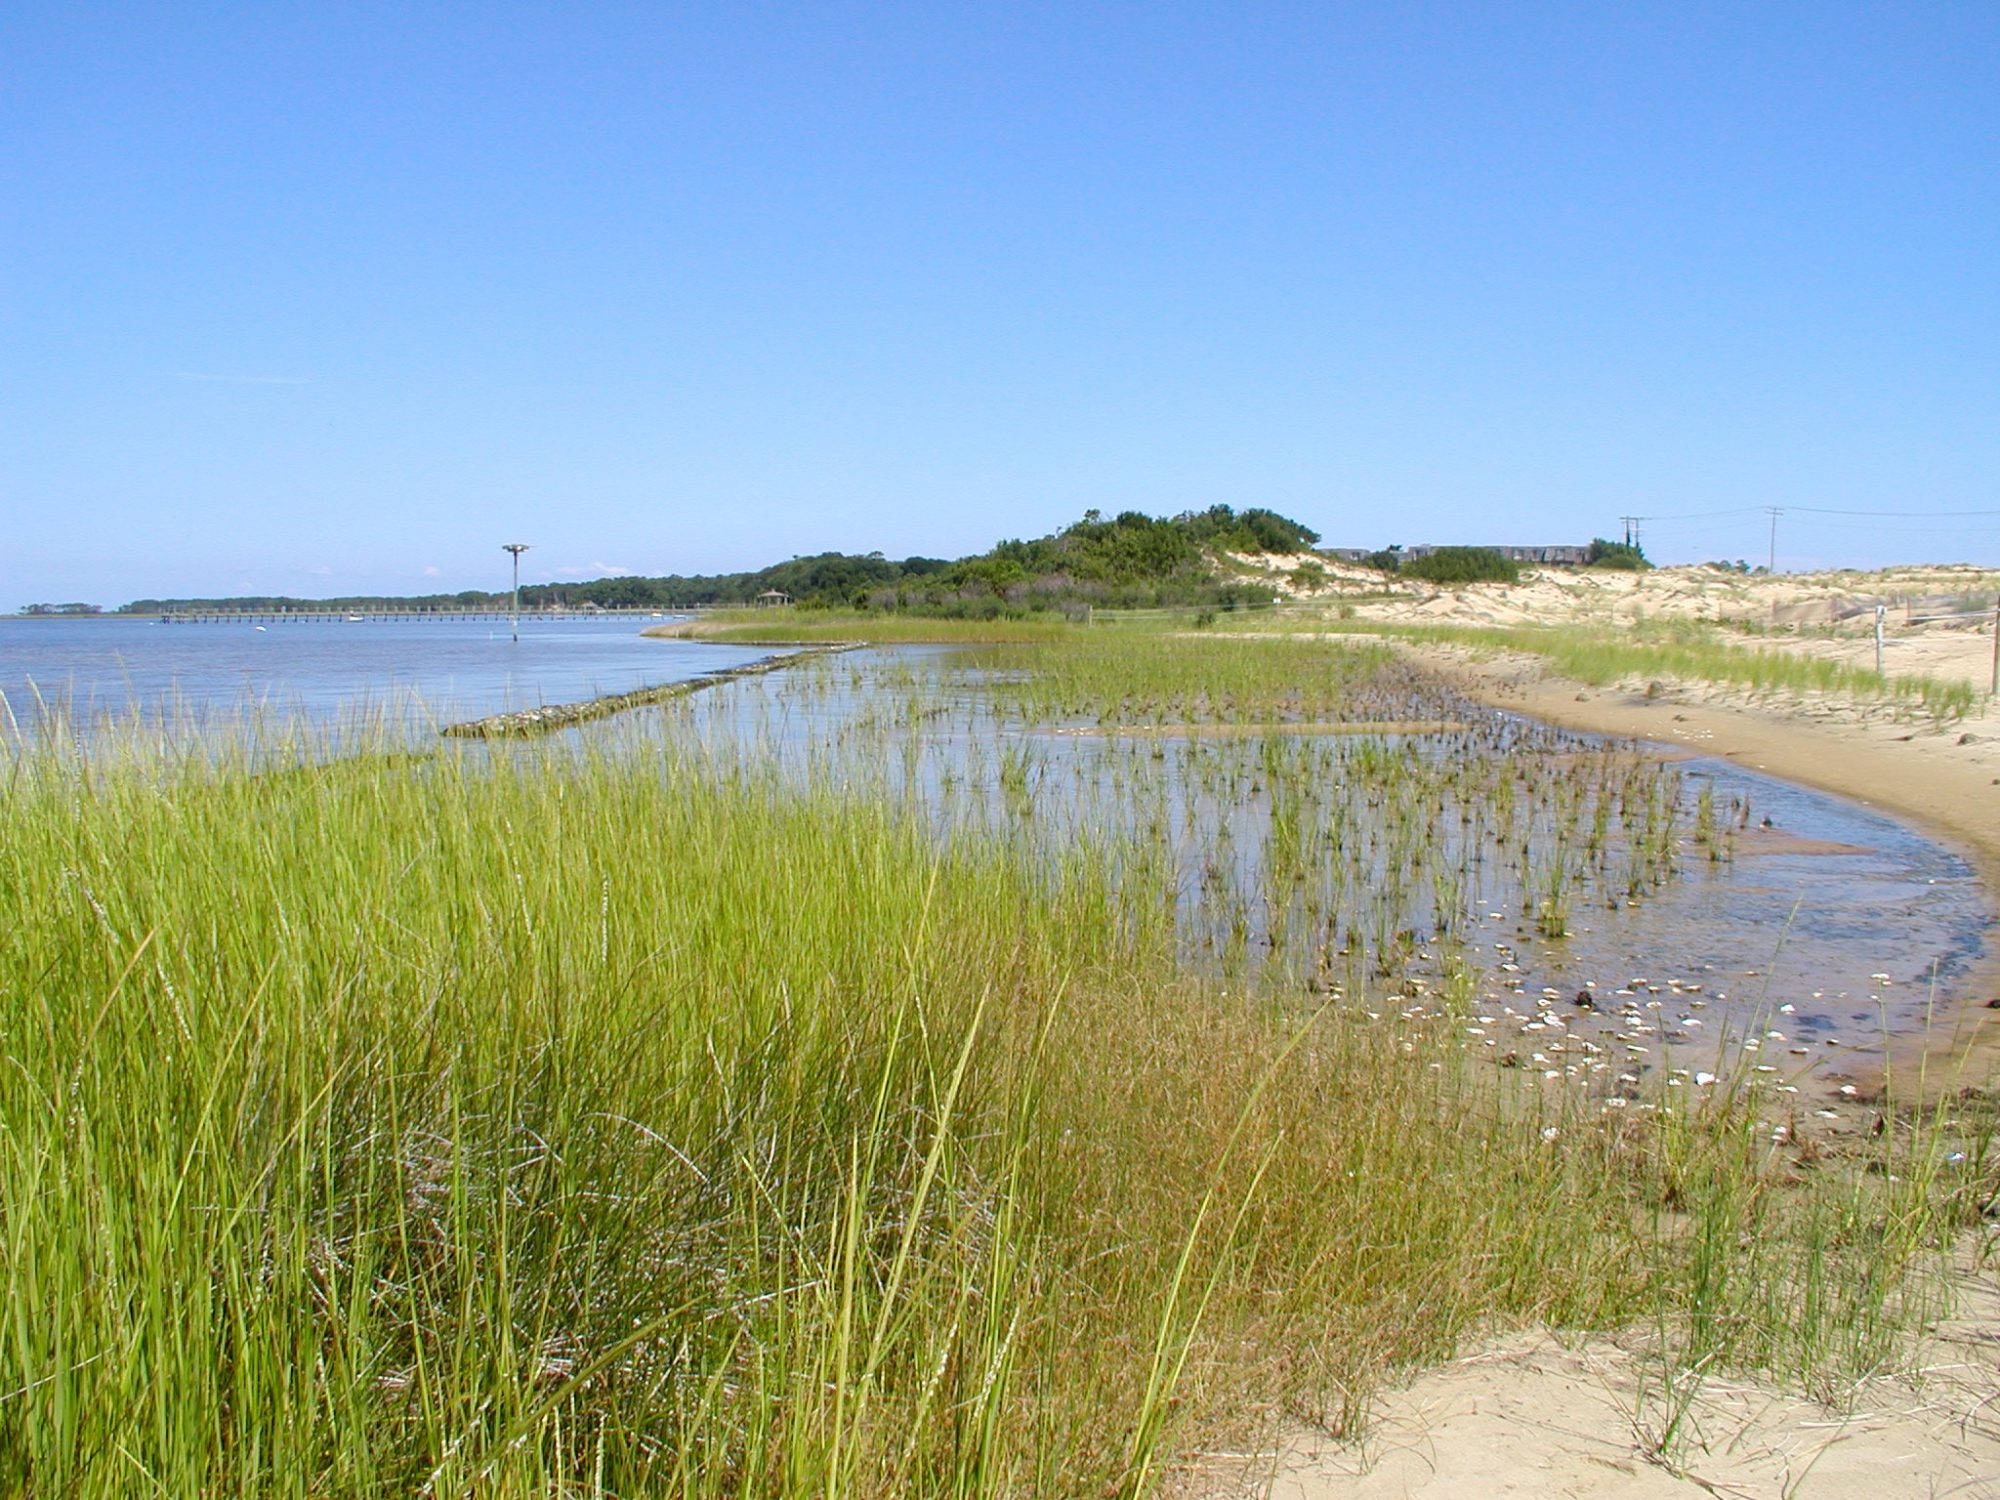 This image shows the NC Coastal Federation's living shoreline, an erosion control project, at Jockey's Ridge State Park. The image looks onto the oyster bag sill that makes up the living shoreline from behind a bed of marsh grass. Beyond the living shoreline the sound and sand dunes can be seen.